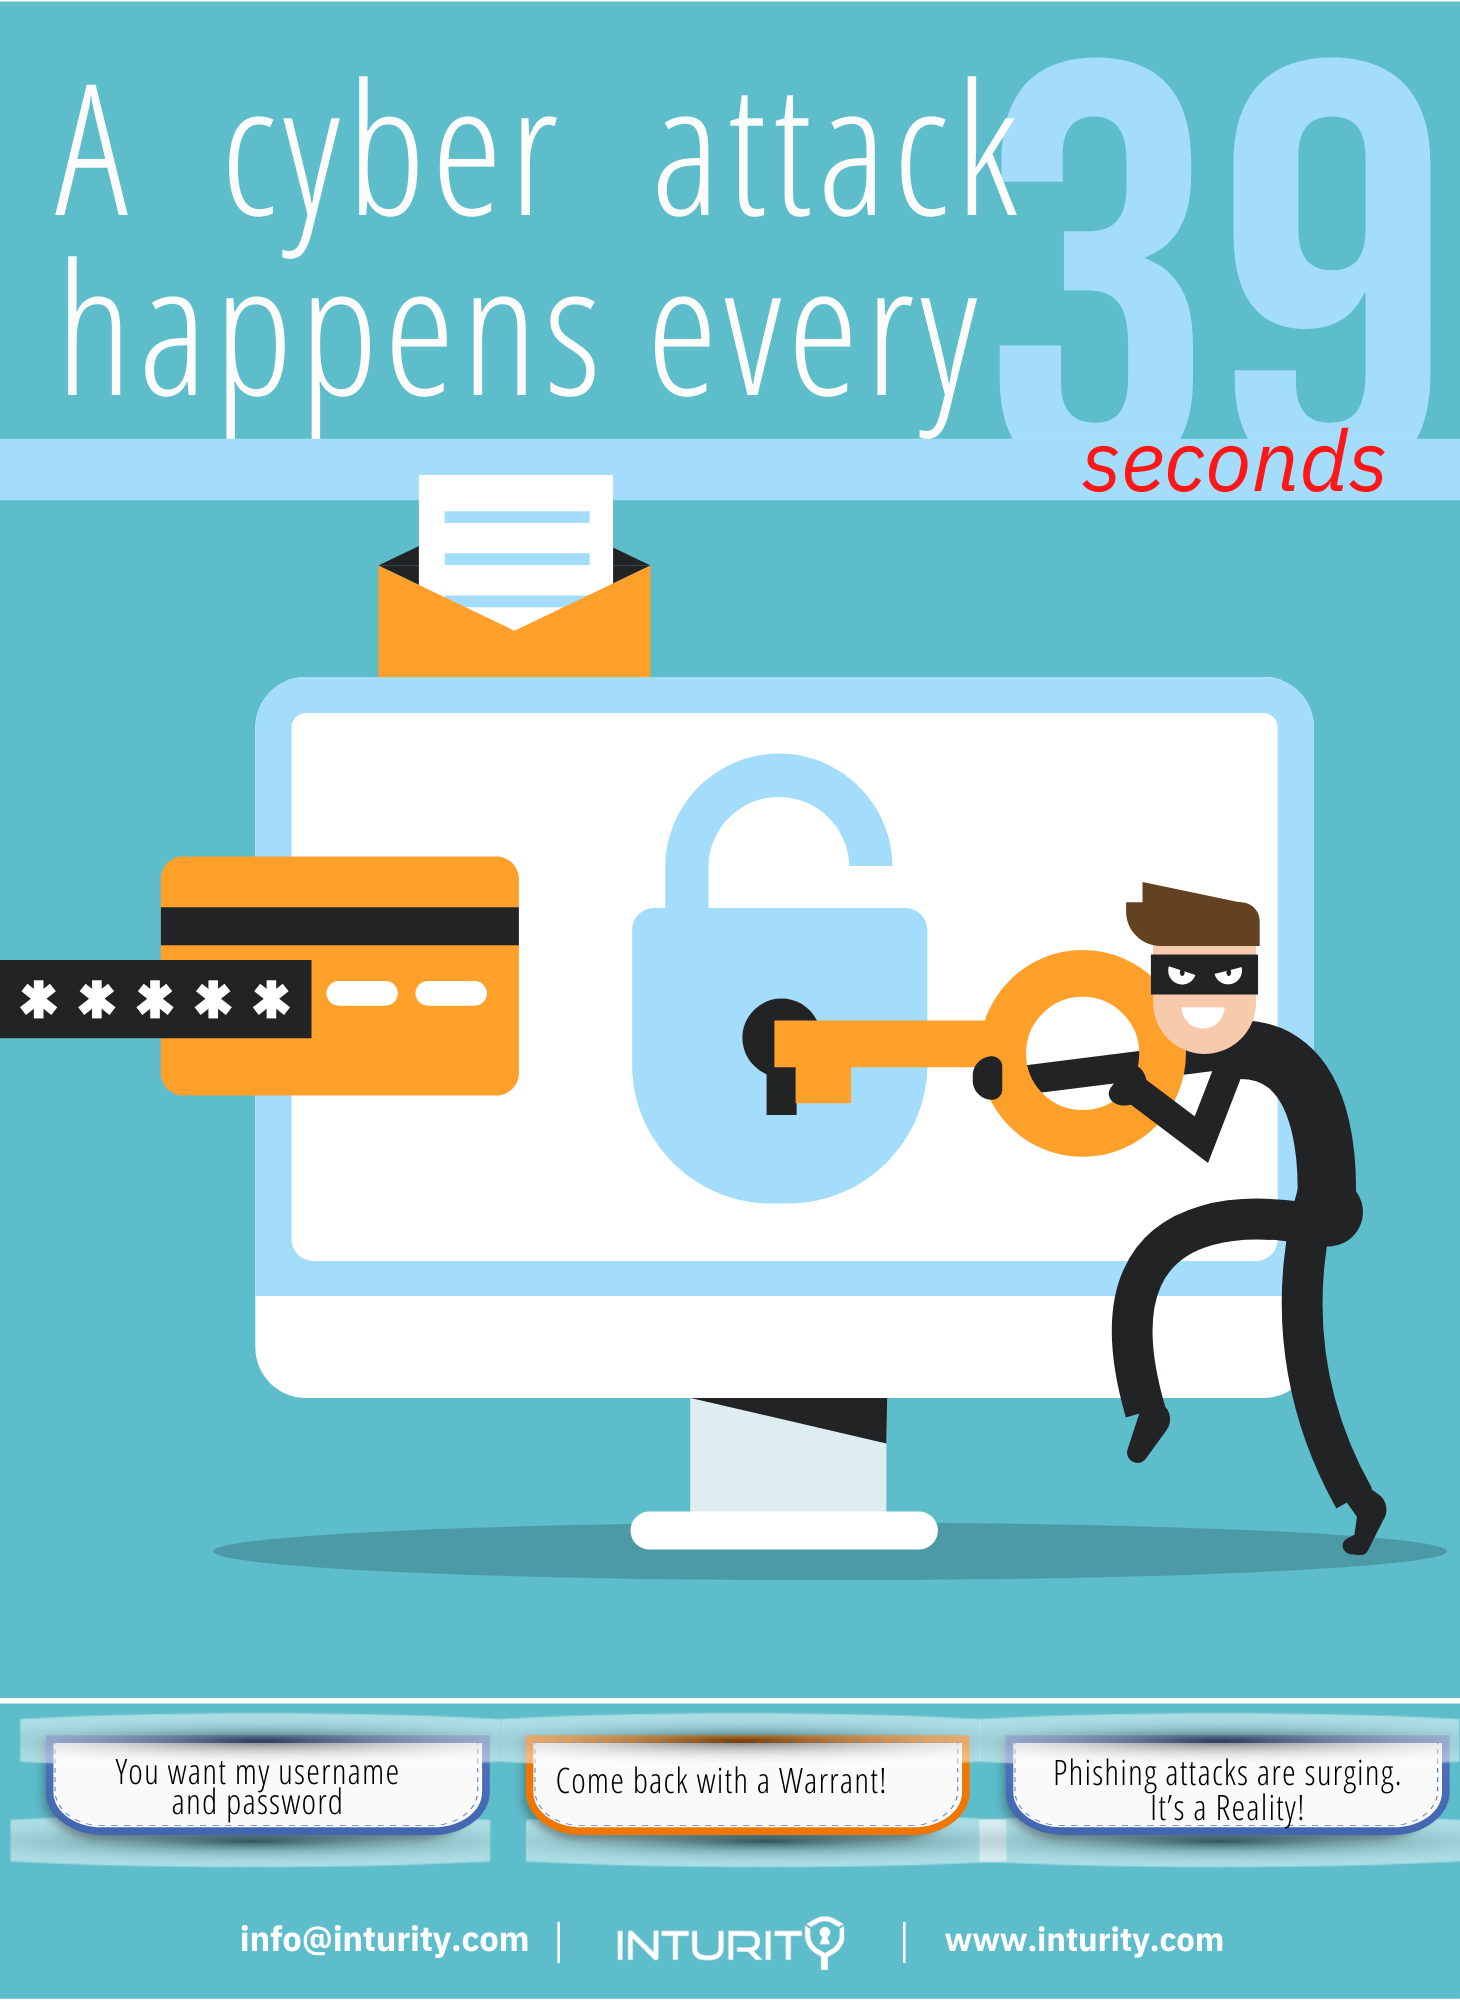 https://inturity.com/wp-content/uploads/2022/08/A-cyber-attack-happens-every-39-seconds.png